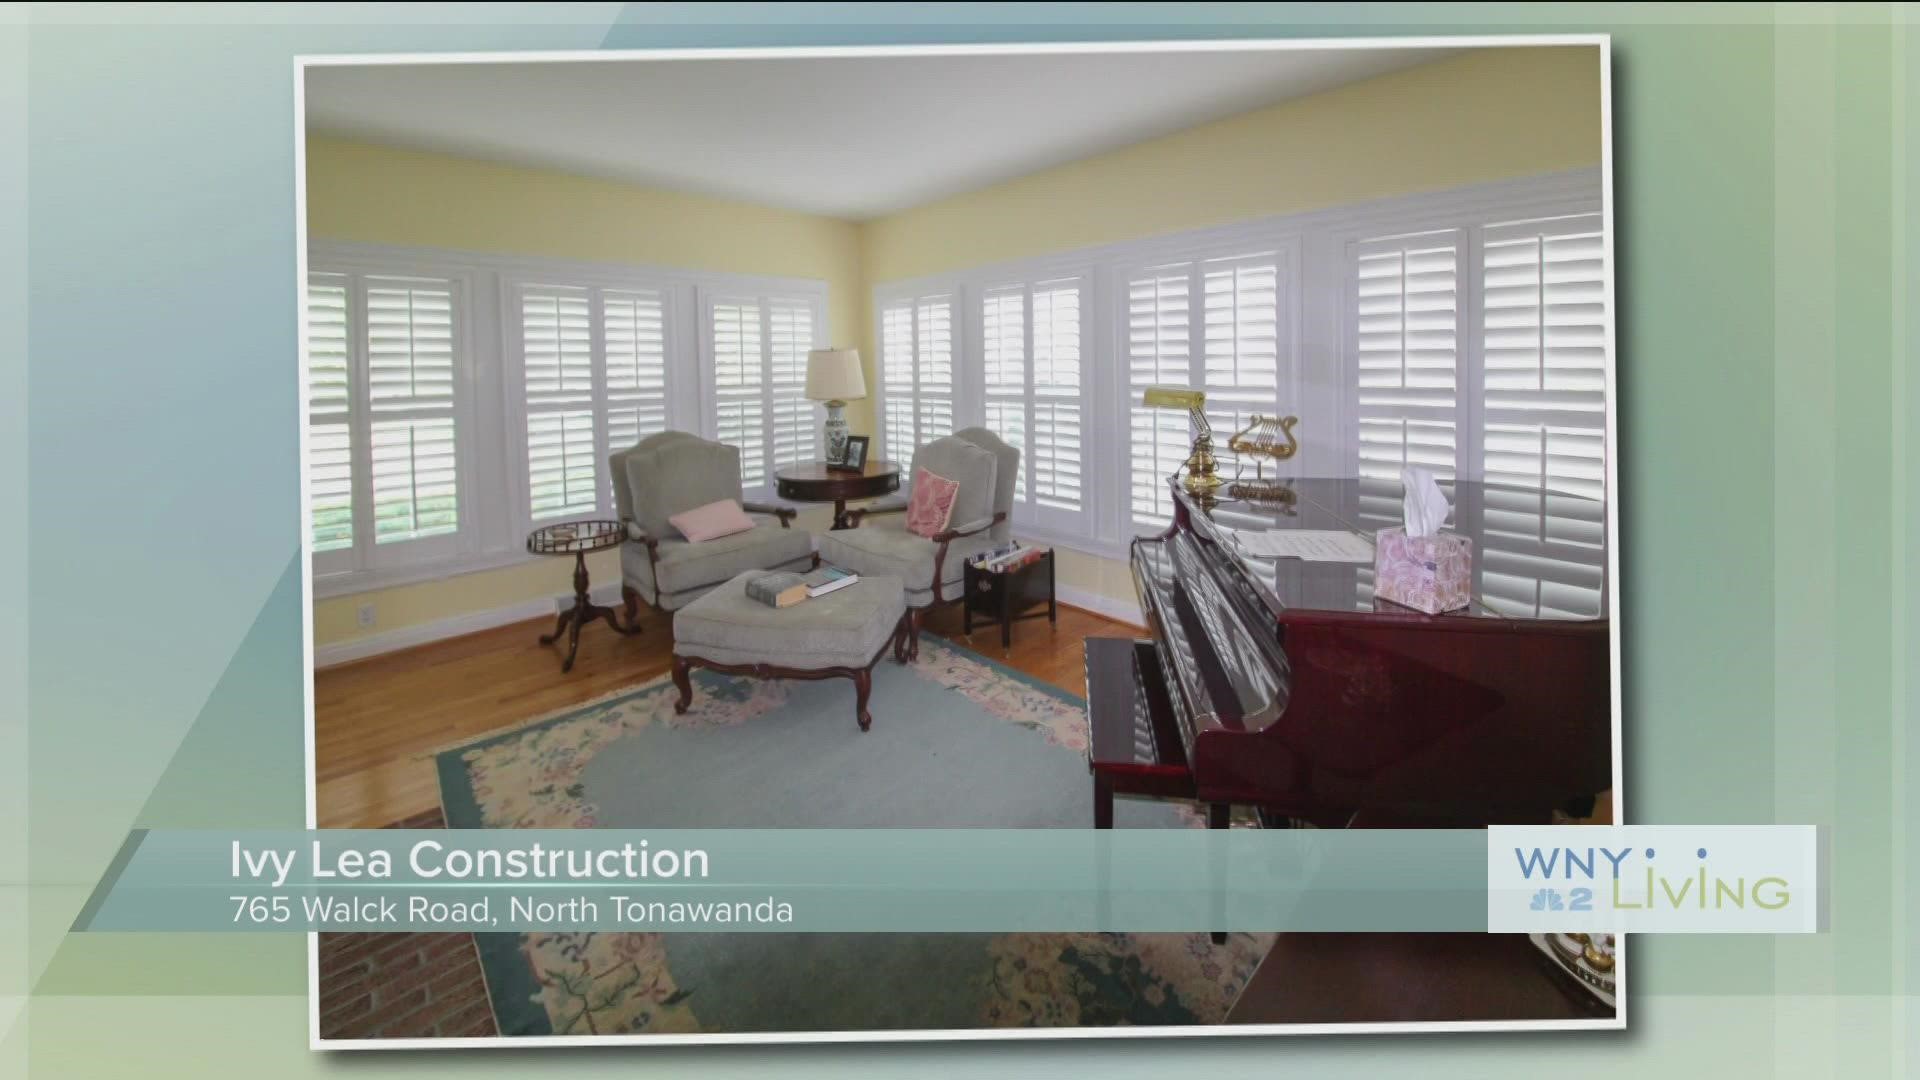 WNY Living - September 3 - Ivy Lea Construction (THIS VIDEO IS SPONSORED BY IVY LEA CONSTRUCTION)